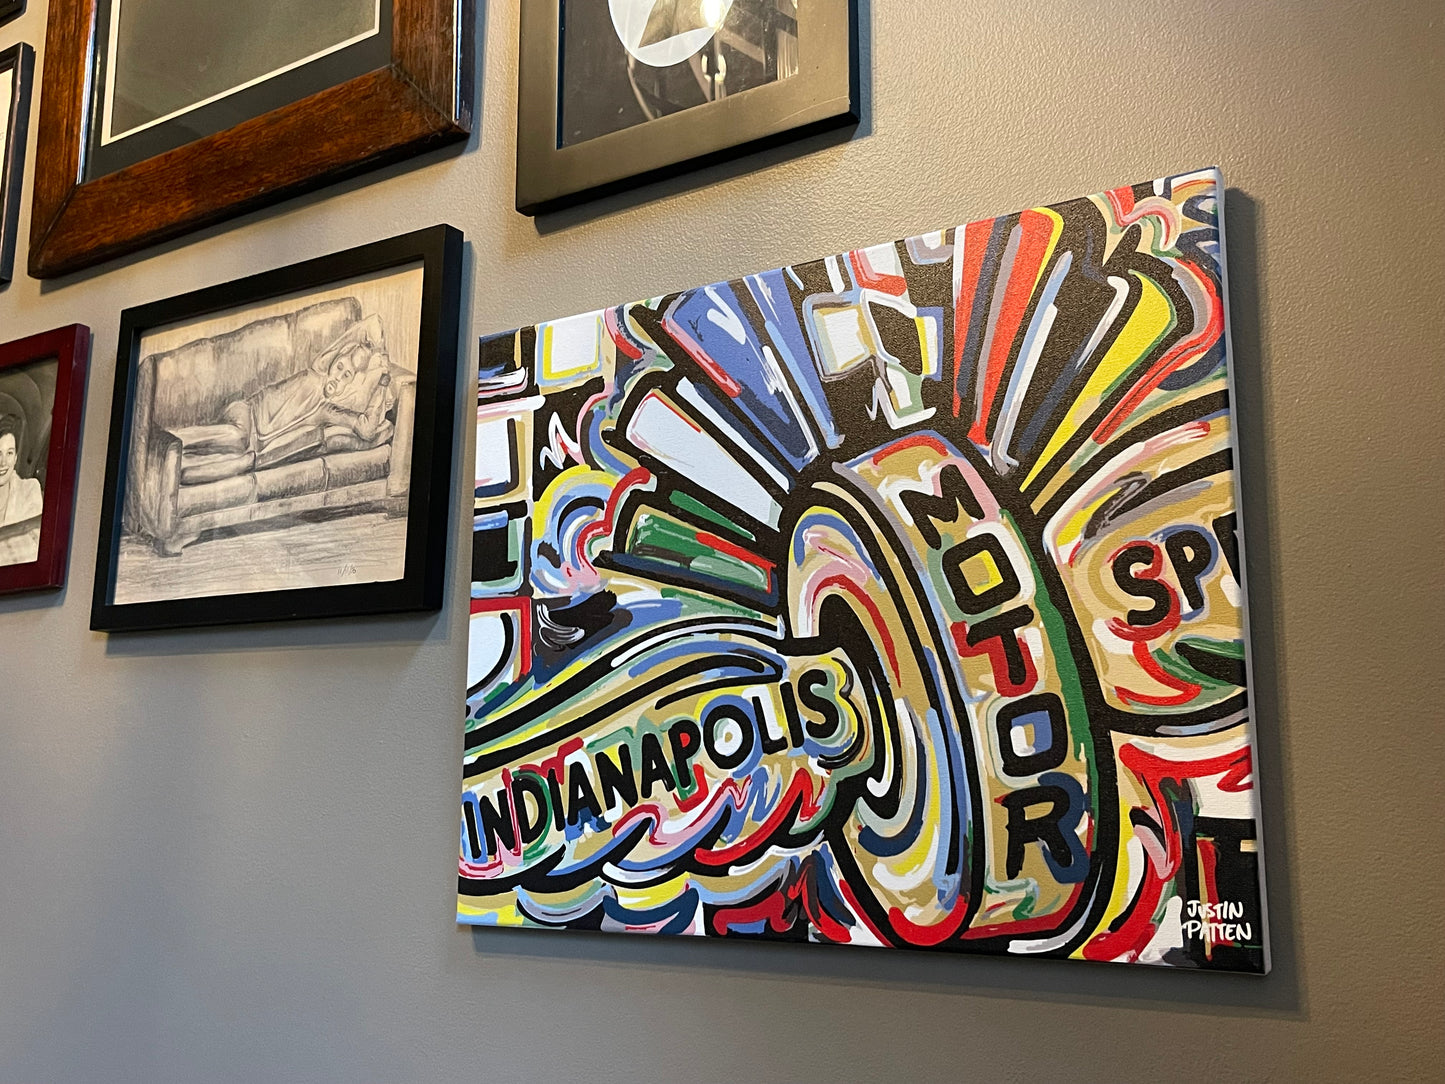 Indianapolis Motor Speedway 20"x16" Wing and Wheel Wrapped Canvas Print by Justin Patten